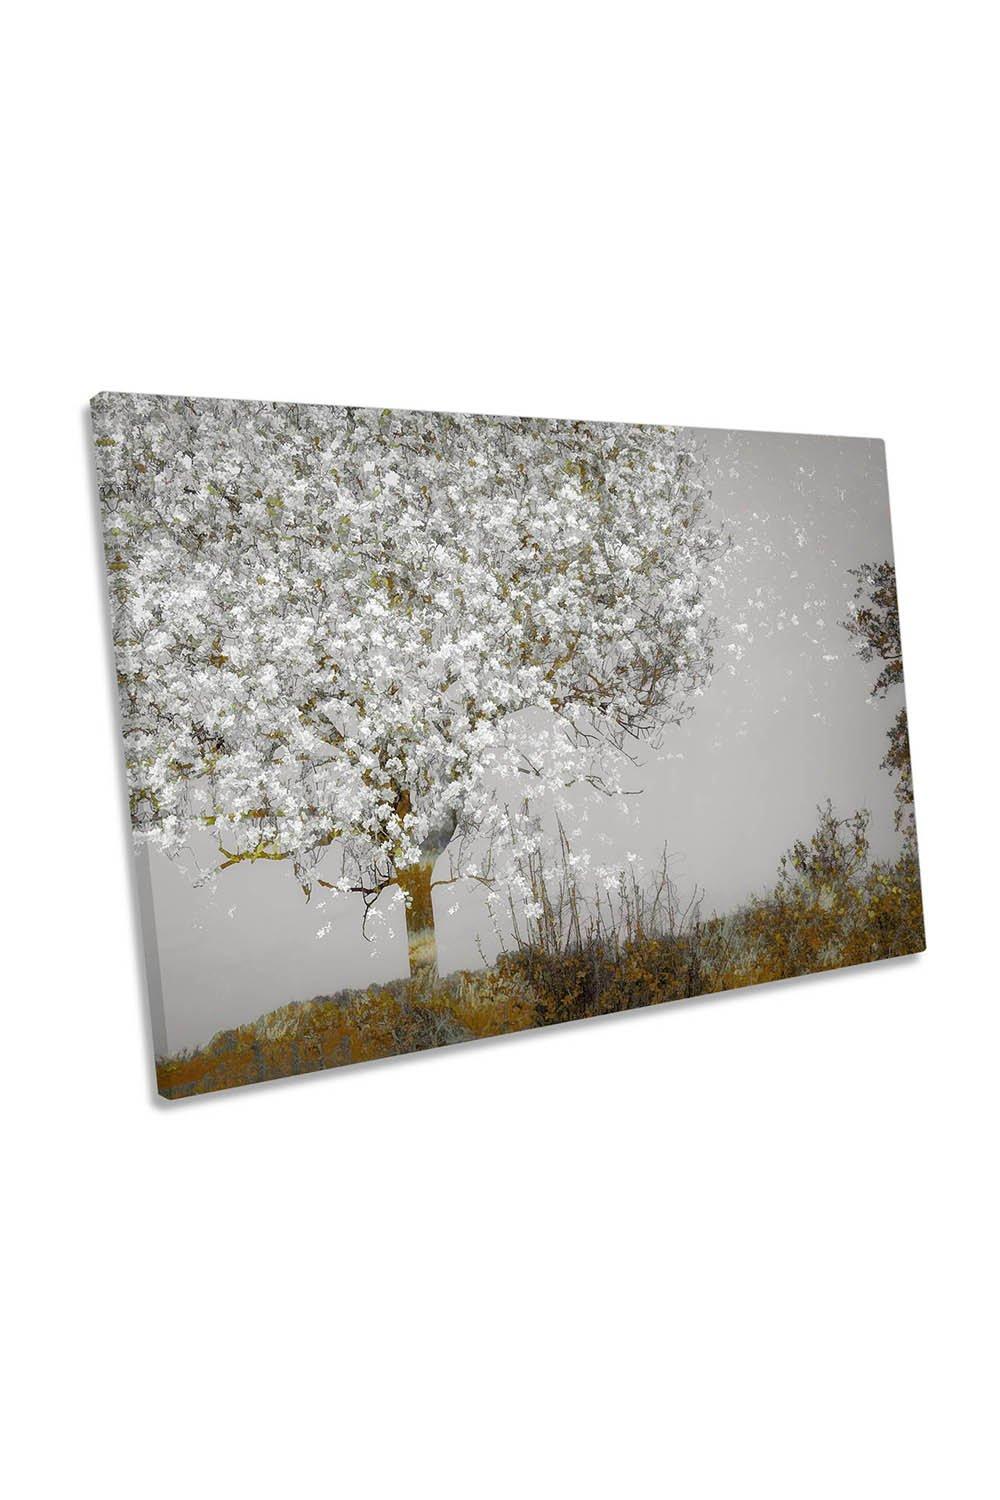 Fruit Tree Blossom Floral Spring Abstract Canvas Wall Art Picture Print